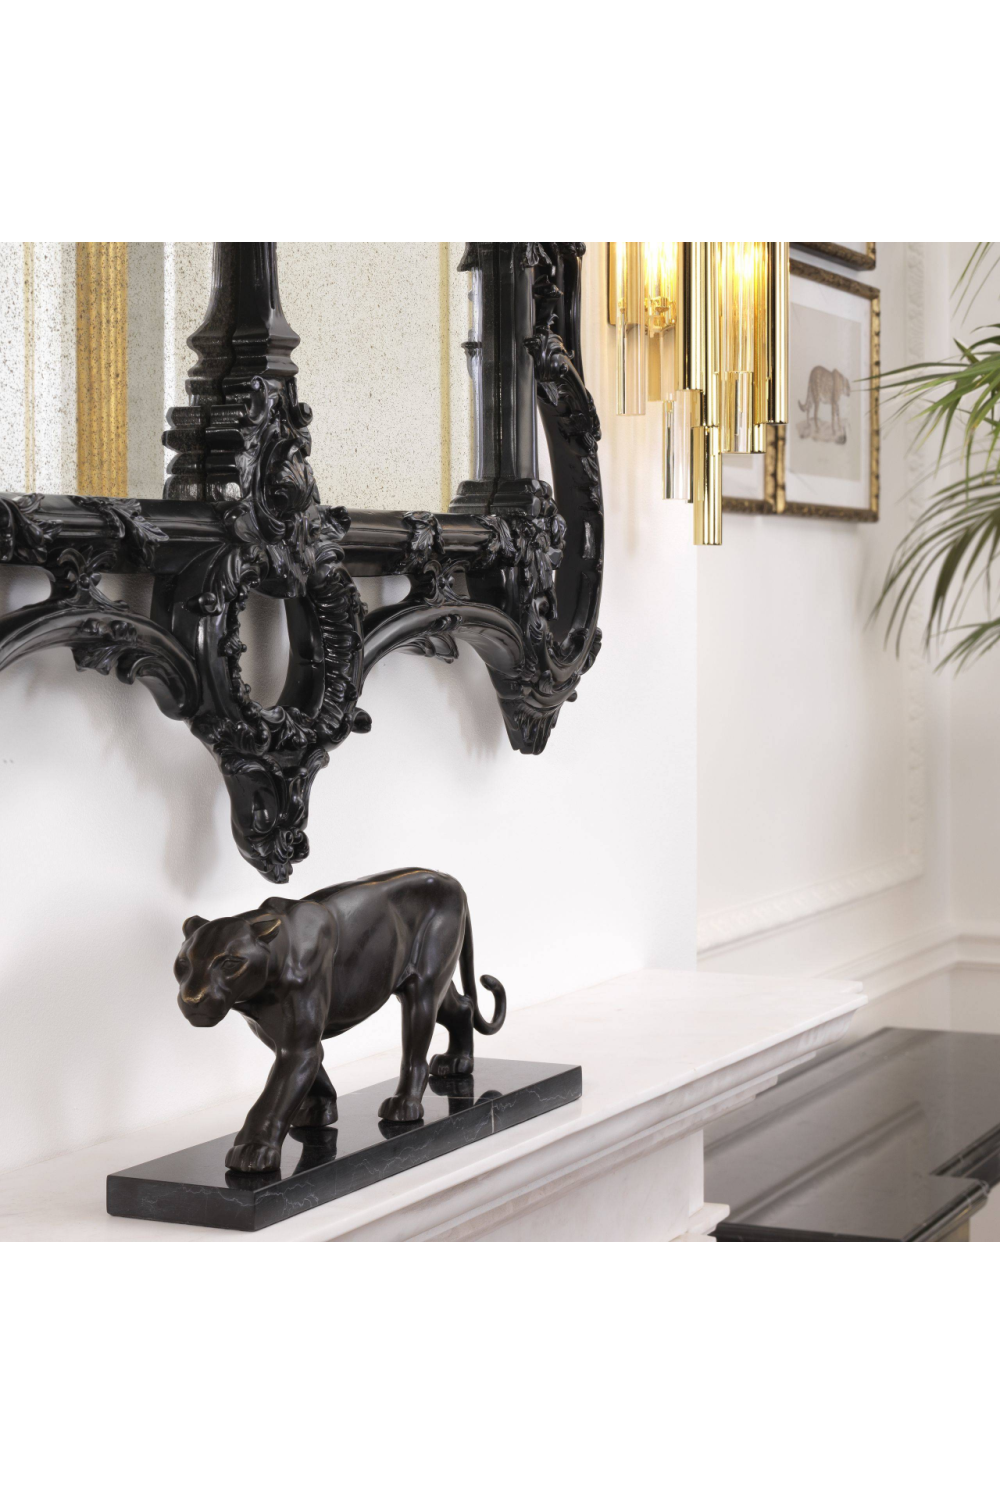 Leopard Statues - casting bronze panther statues for decor